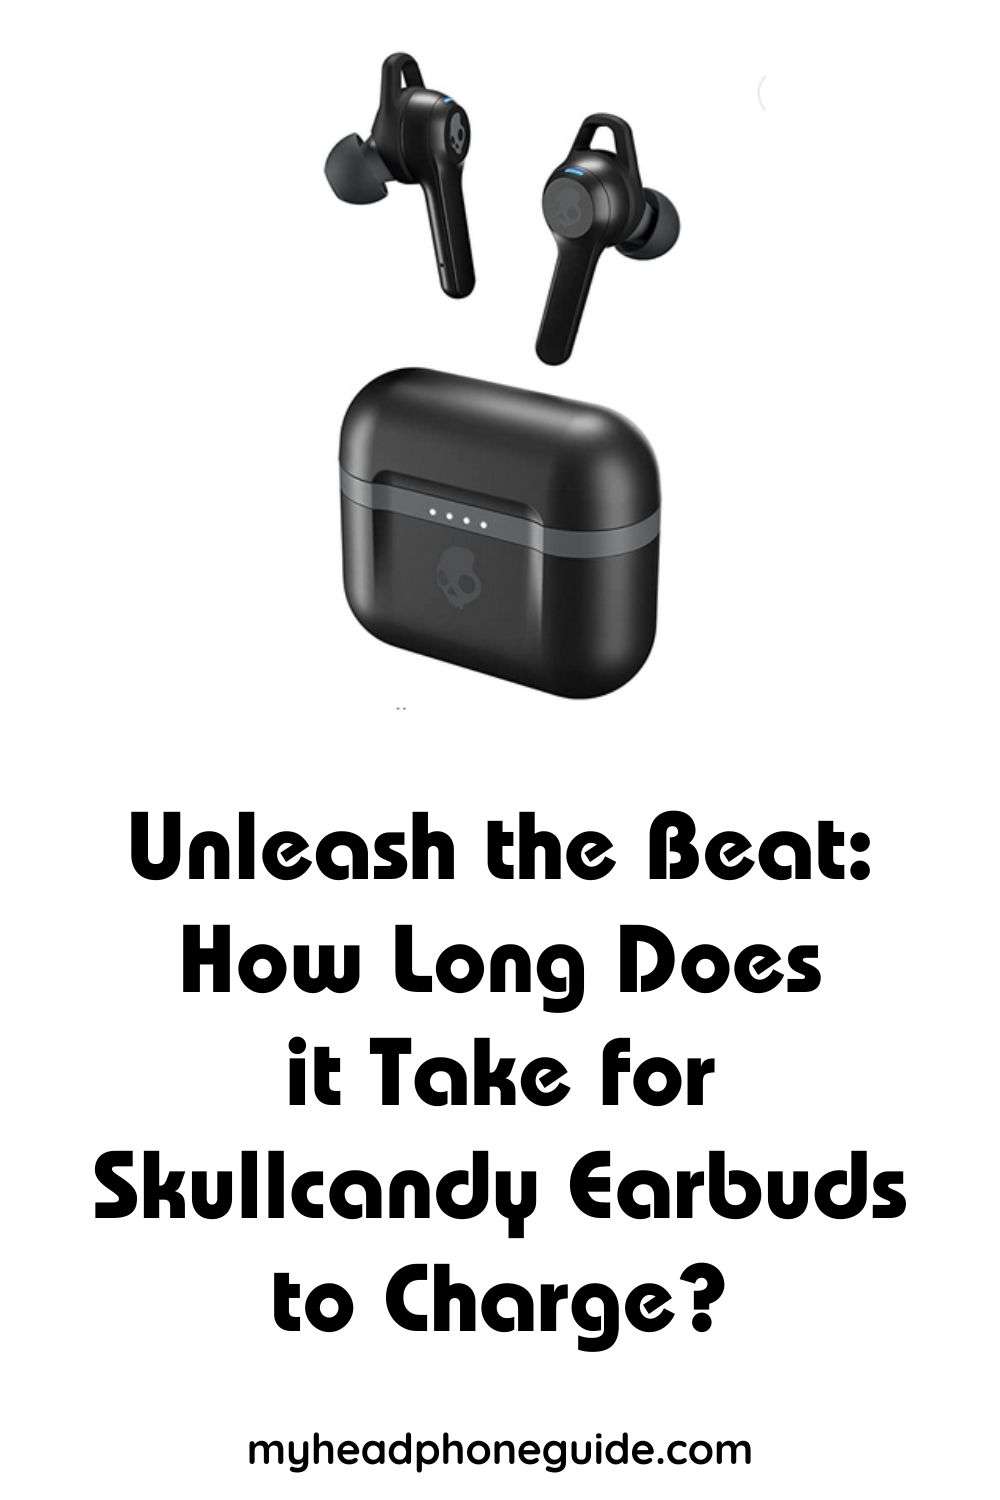 Unleash the Beat: How Long Does it Take for Skullcandy Earbuds to Charge?